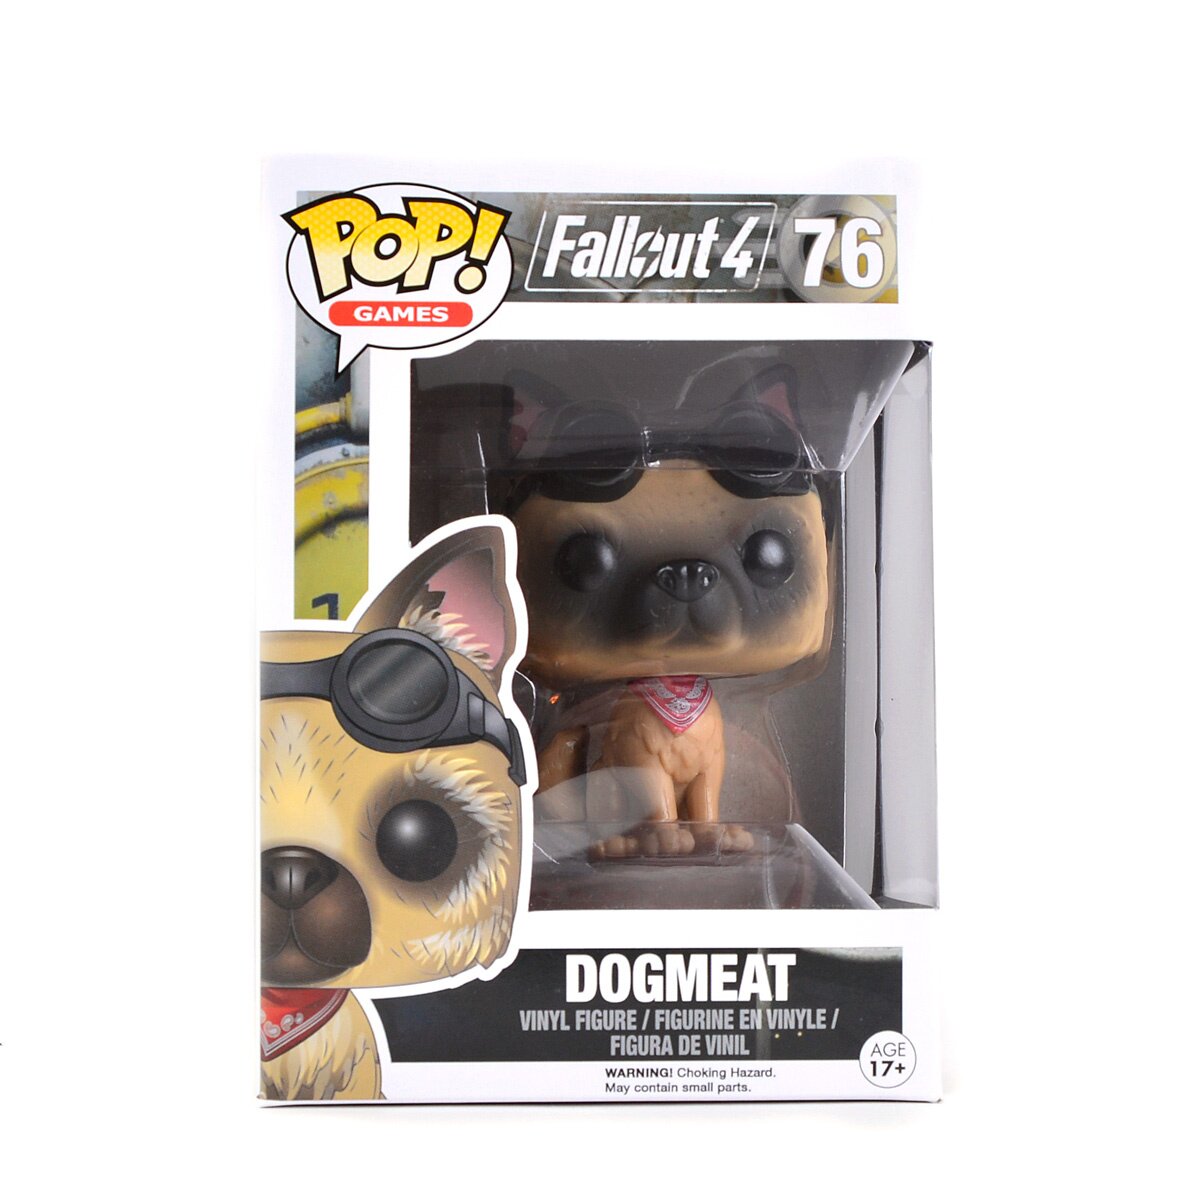 POP! Games No. 76: Fallout 4 - Dogmeat